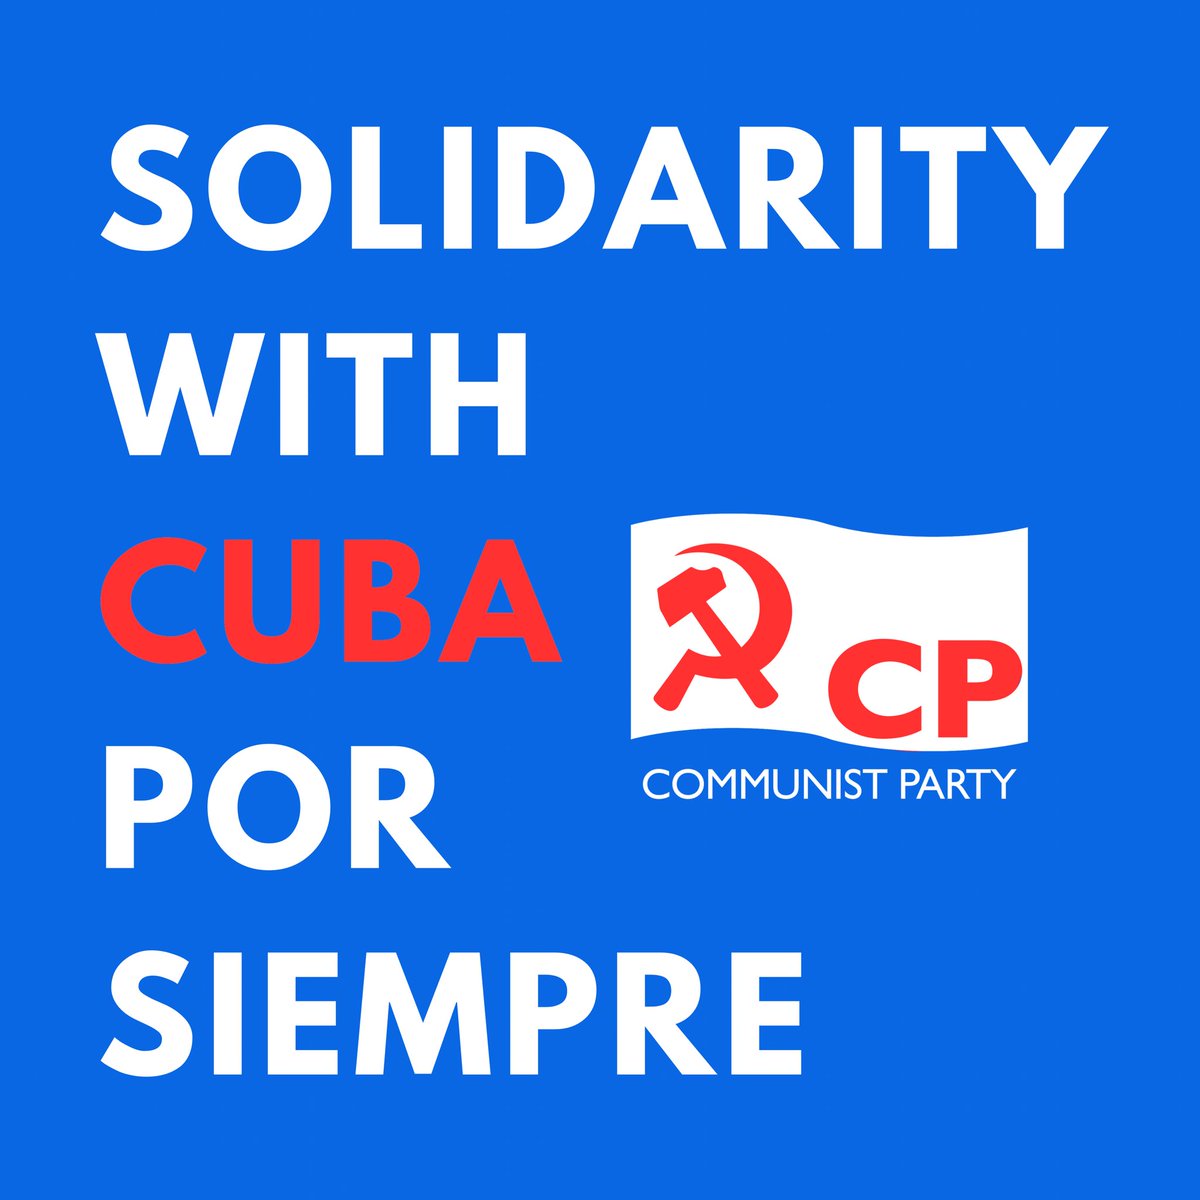 Our General Secretary, Comrade Robert Griffiths, met with the new Cuban Ambassador @IsmaraWalter @EmbaCuba_UK recently, emphasising the need to build greater solidarity with the Cuban people and their revolution here in Britain. “My recent meeting with Cuba's new ambassador…